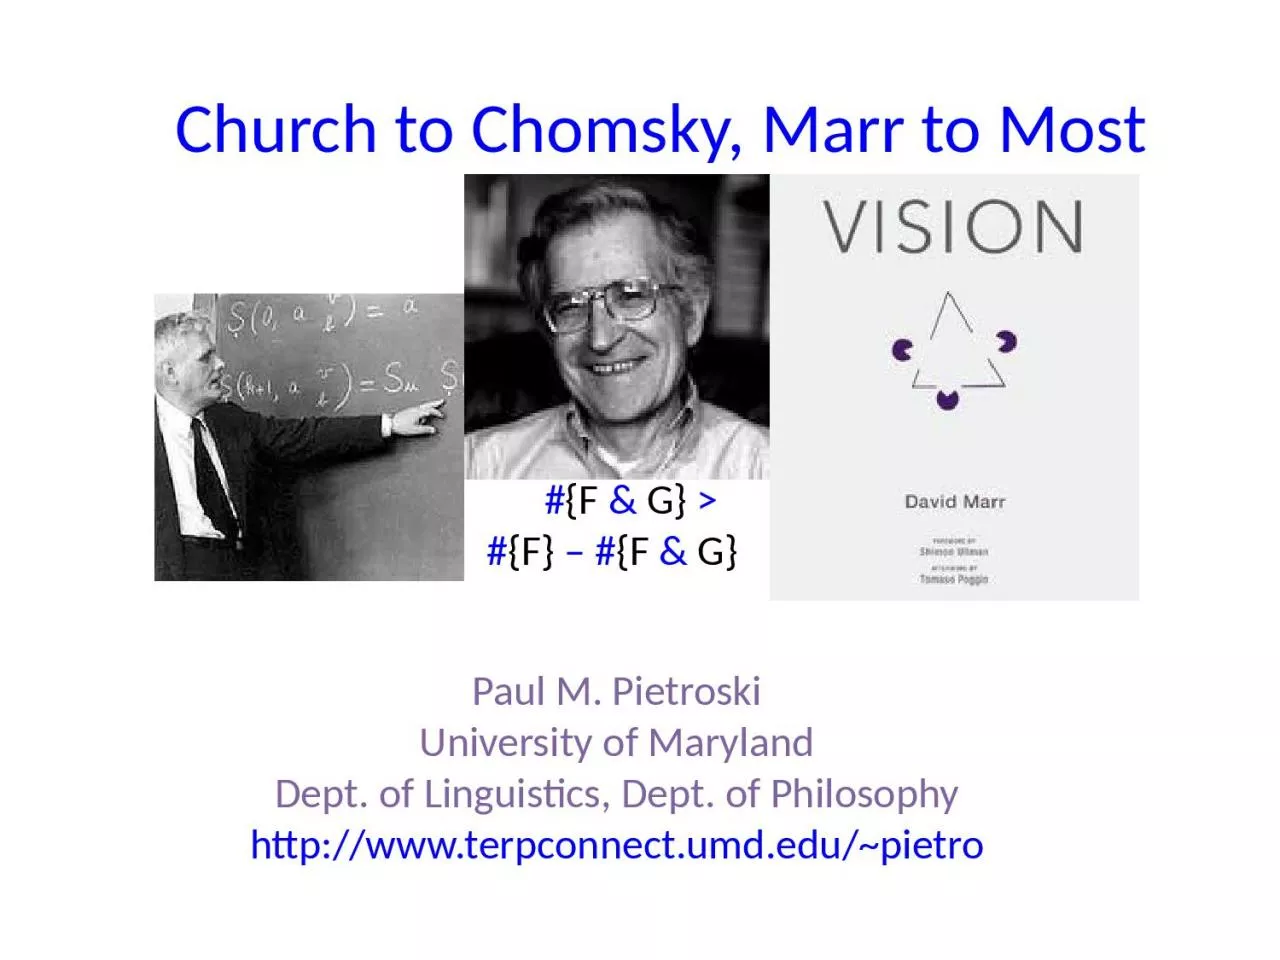 Church to Chomsky, Marr to Most